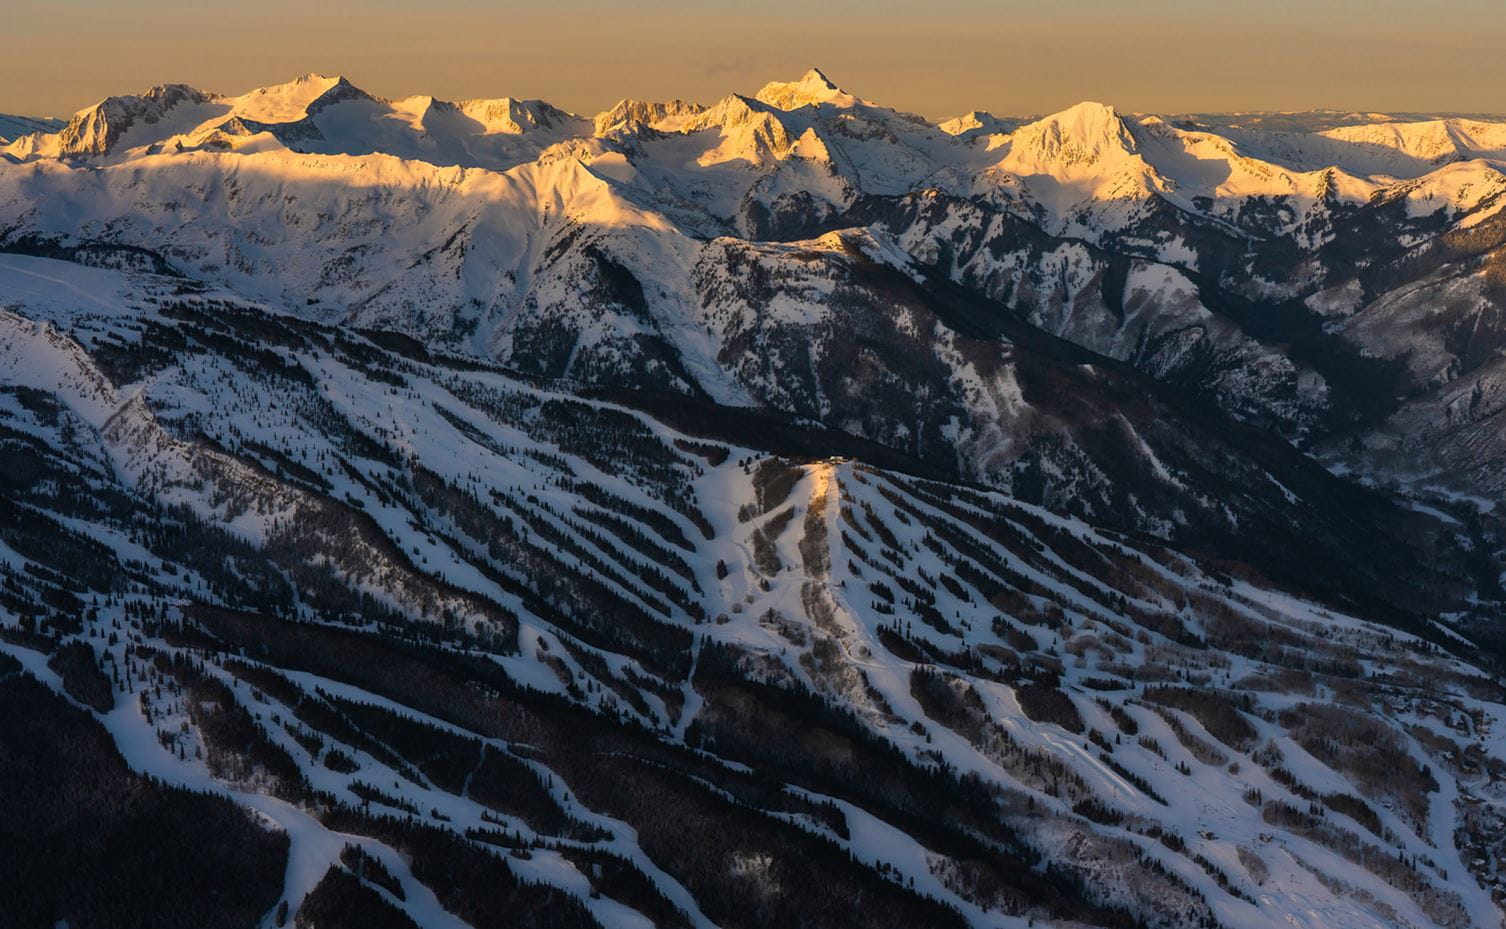 Sunrise across the Elk Mountains with Snowmass